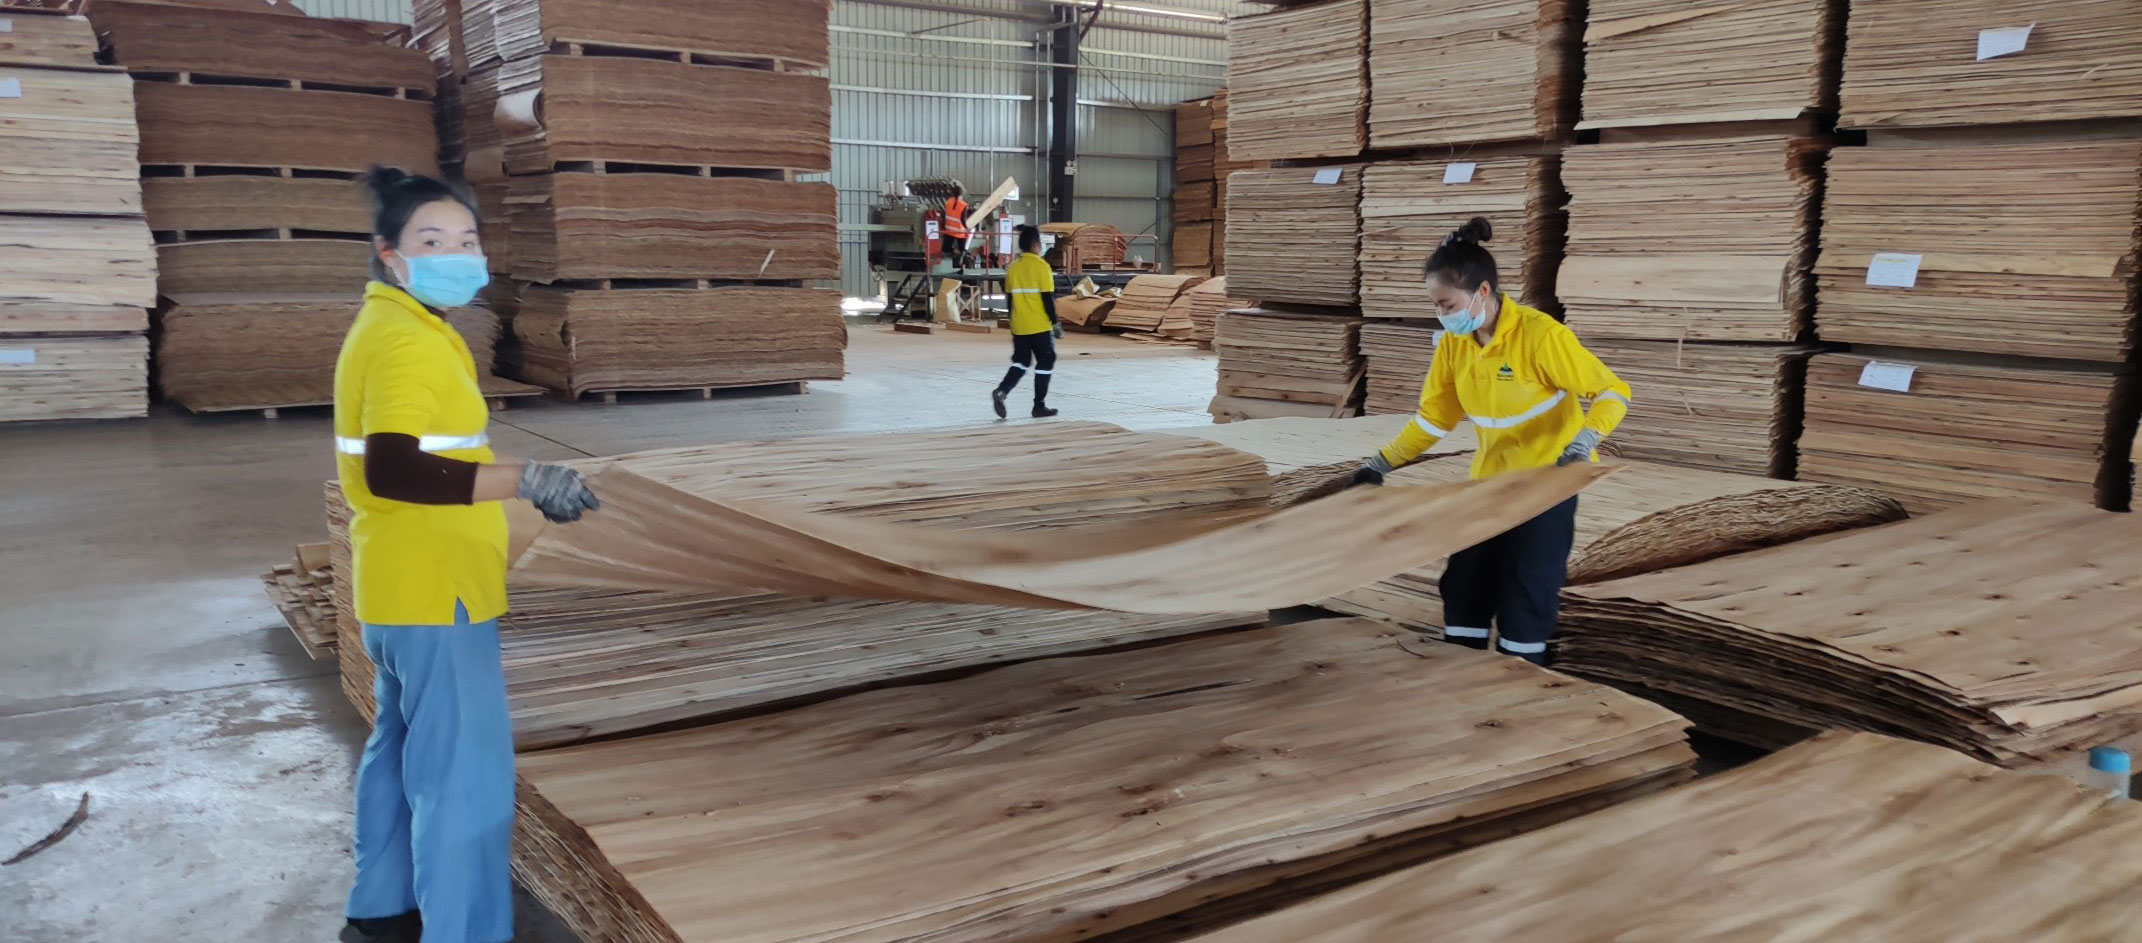 Two people holding a large sheet of timber in a timber warehouse